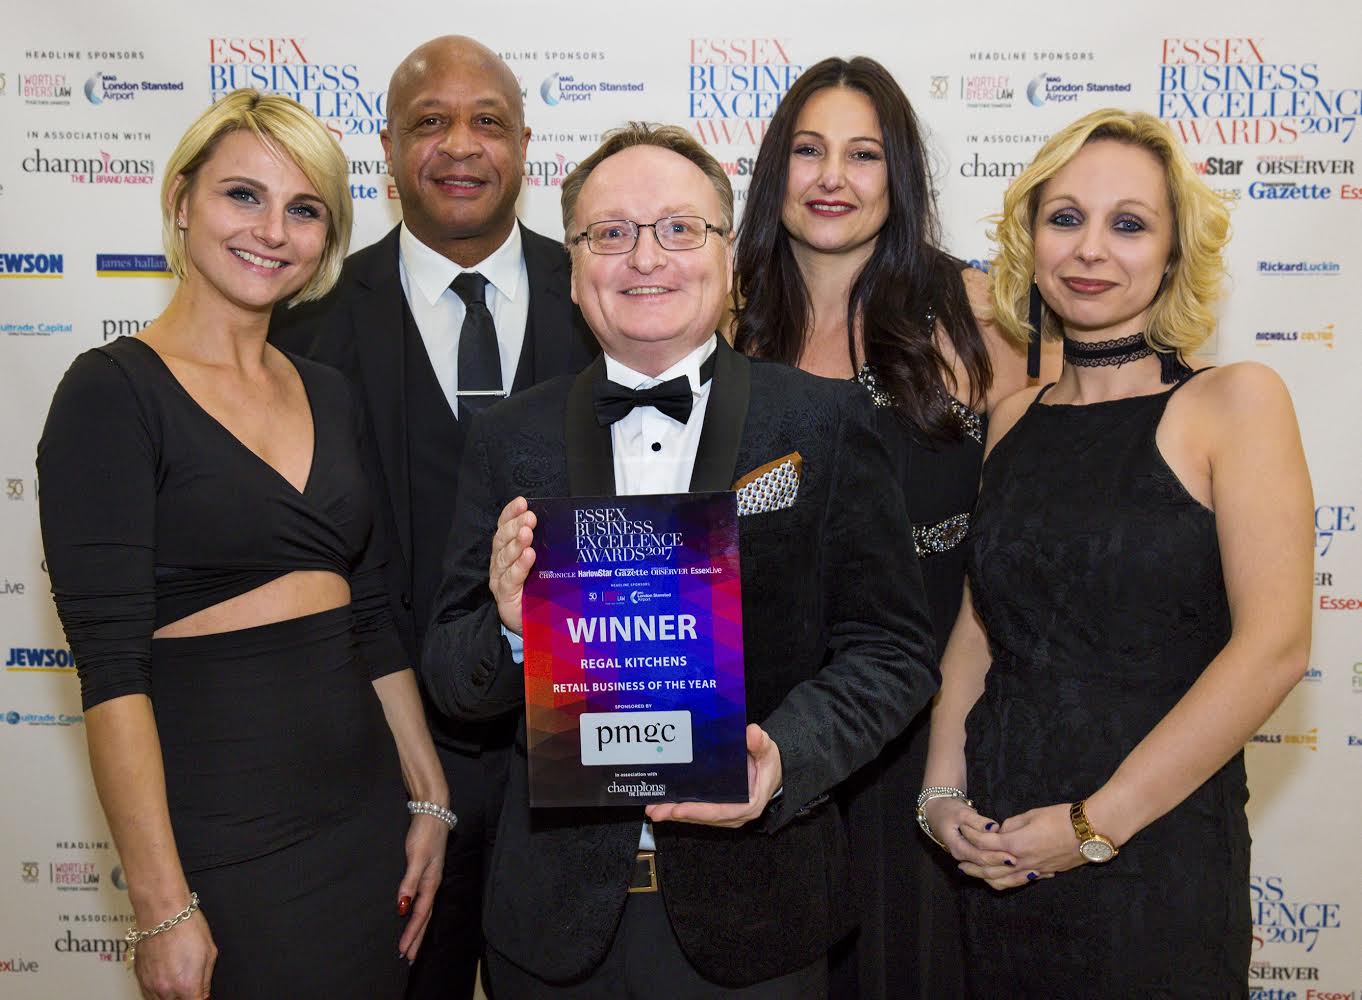 2017 - Essex Business Excellence Awards - Retail Business of the year - Winner